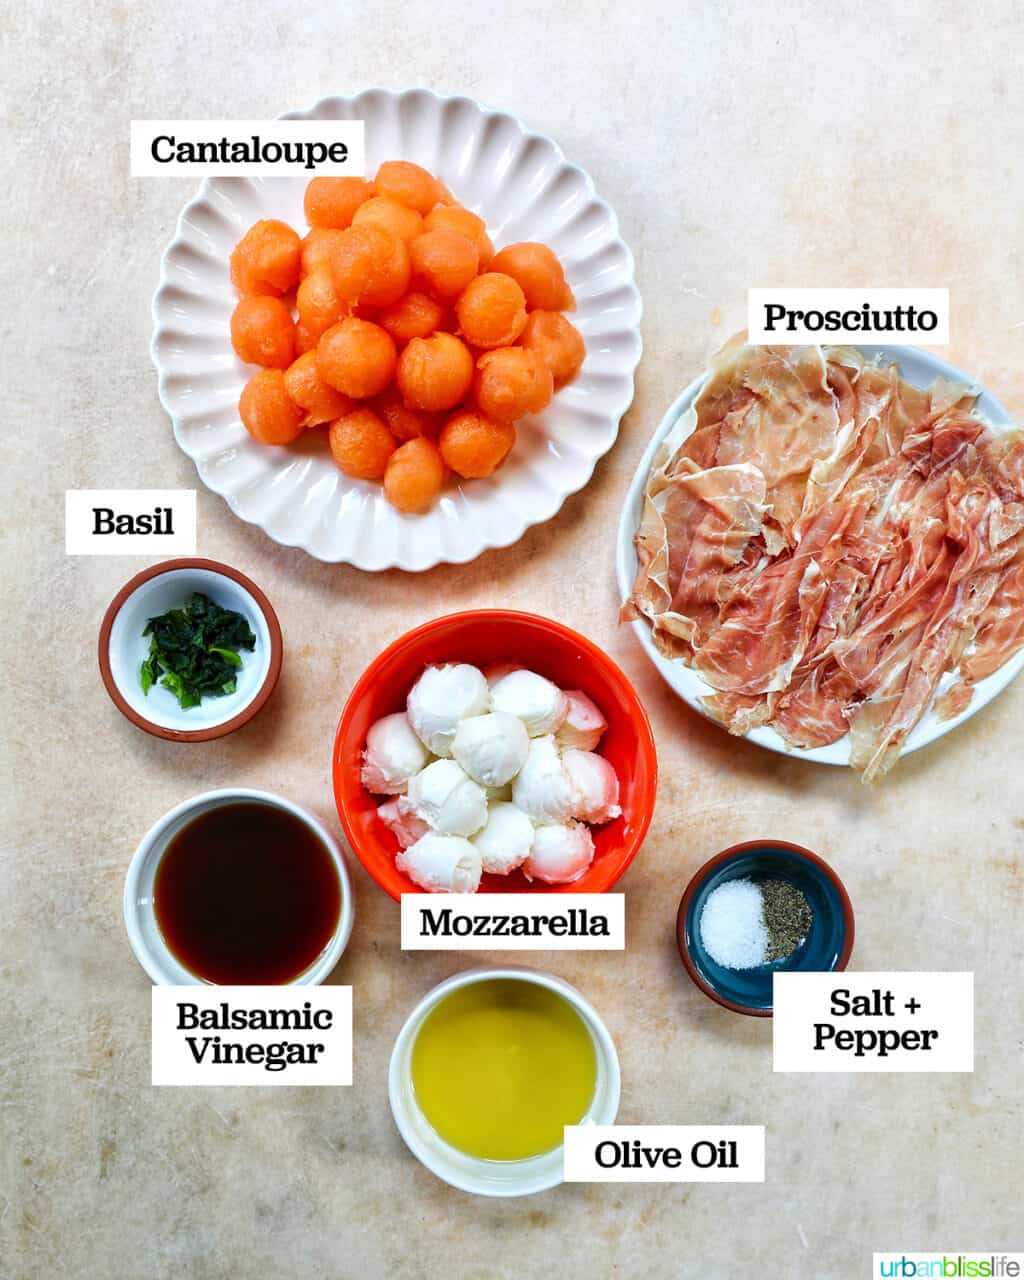 ingredients in bowls and on plates to make melon prosciutto caprese salad on a faded table.